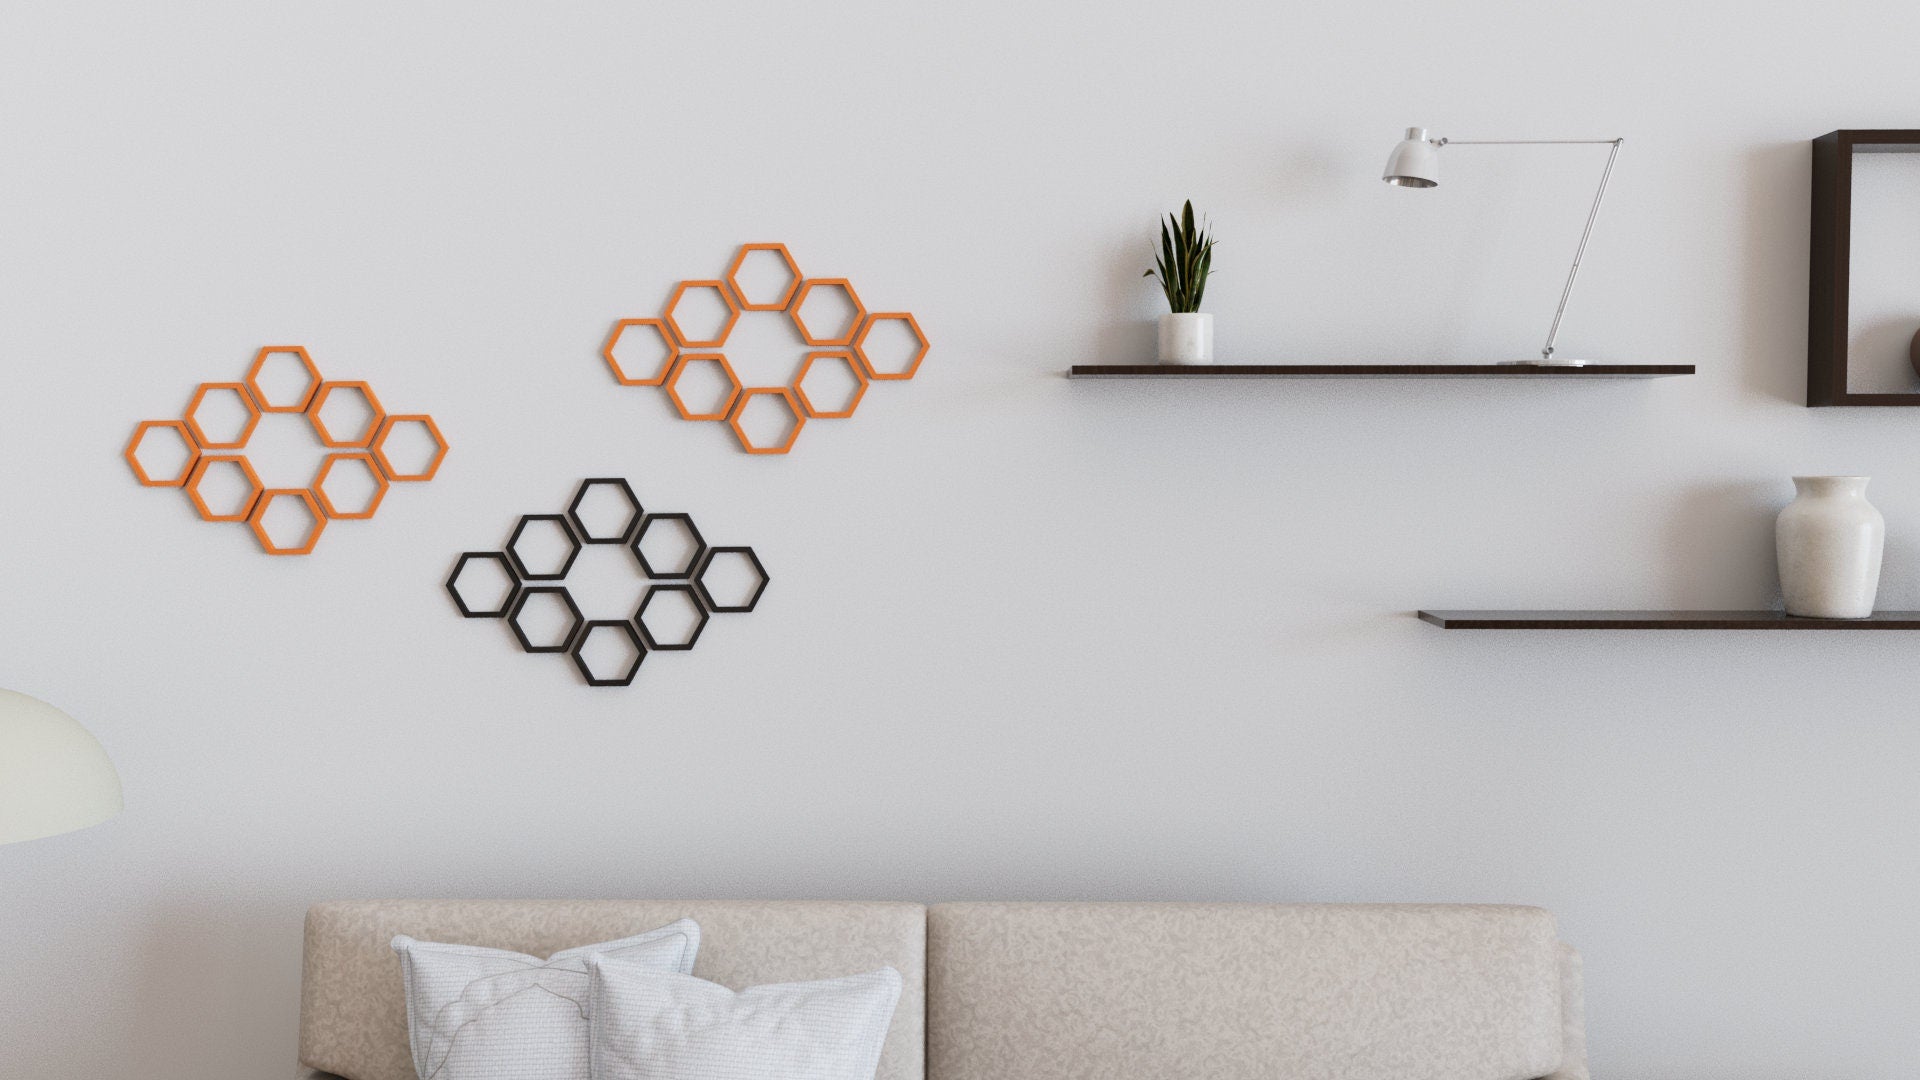 3D Hollow Hexagon Wall Tiles In Tons of Sizes & Colors! Get A Modern Honeycomb Look With 6in Wide 3D Hexagon Wall Tiles